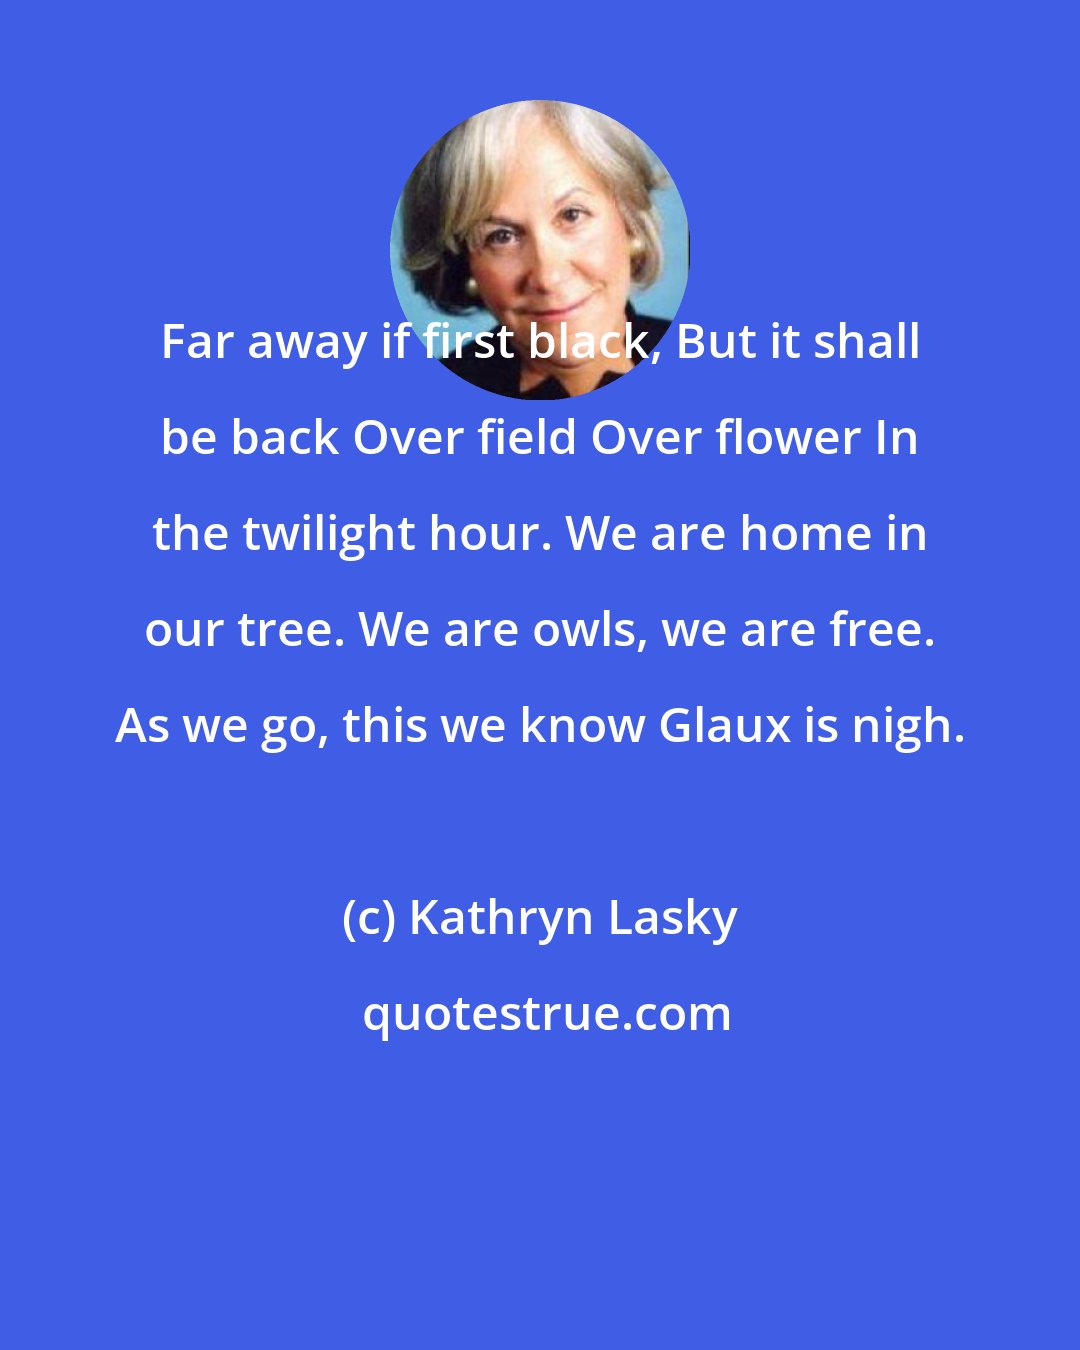 Kathryn Lasky: Far away if first black, But it shall be back Over field Over flower In the twilight hour. We are home in our tree. We are owls, we are free. As we go, this we know Glaux is nigh.